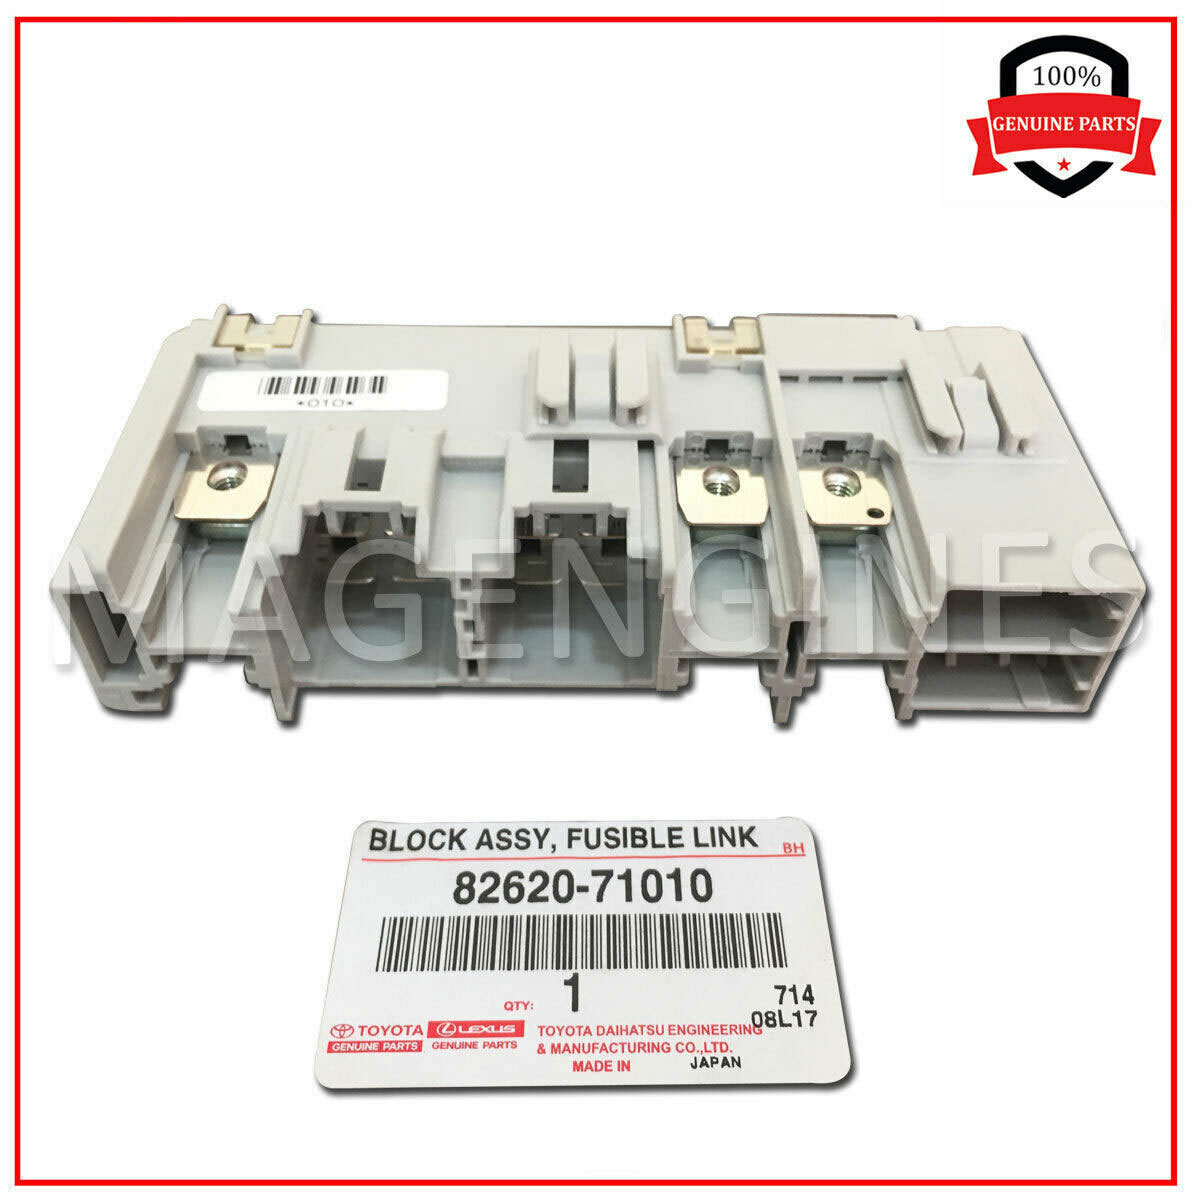 FUSIBLE LINK 82620-71012 8262071012 Genuine Toyota BLOCK ASSY